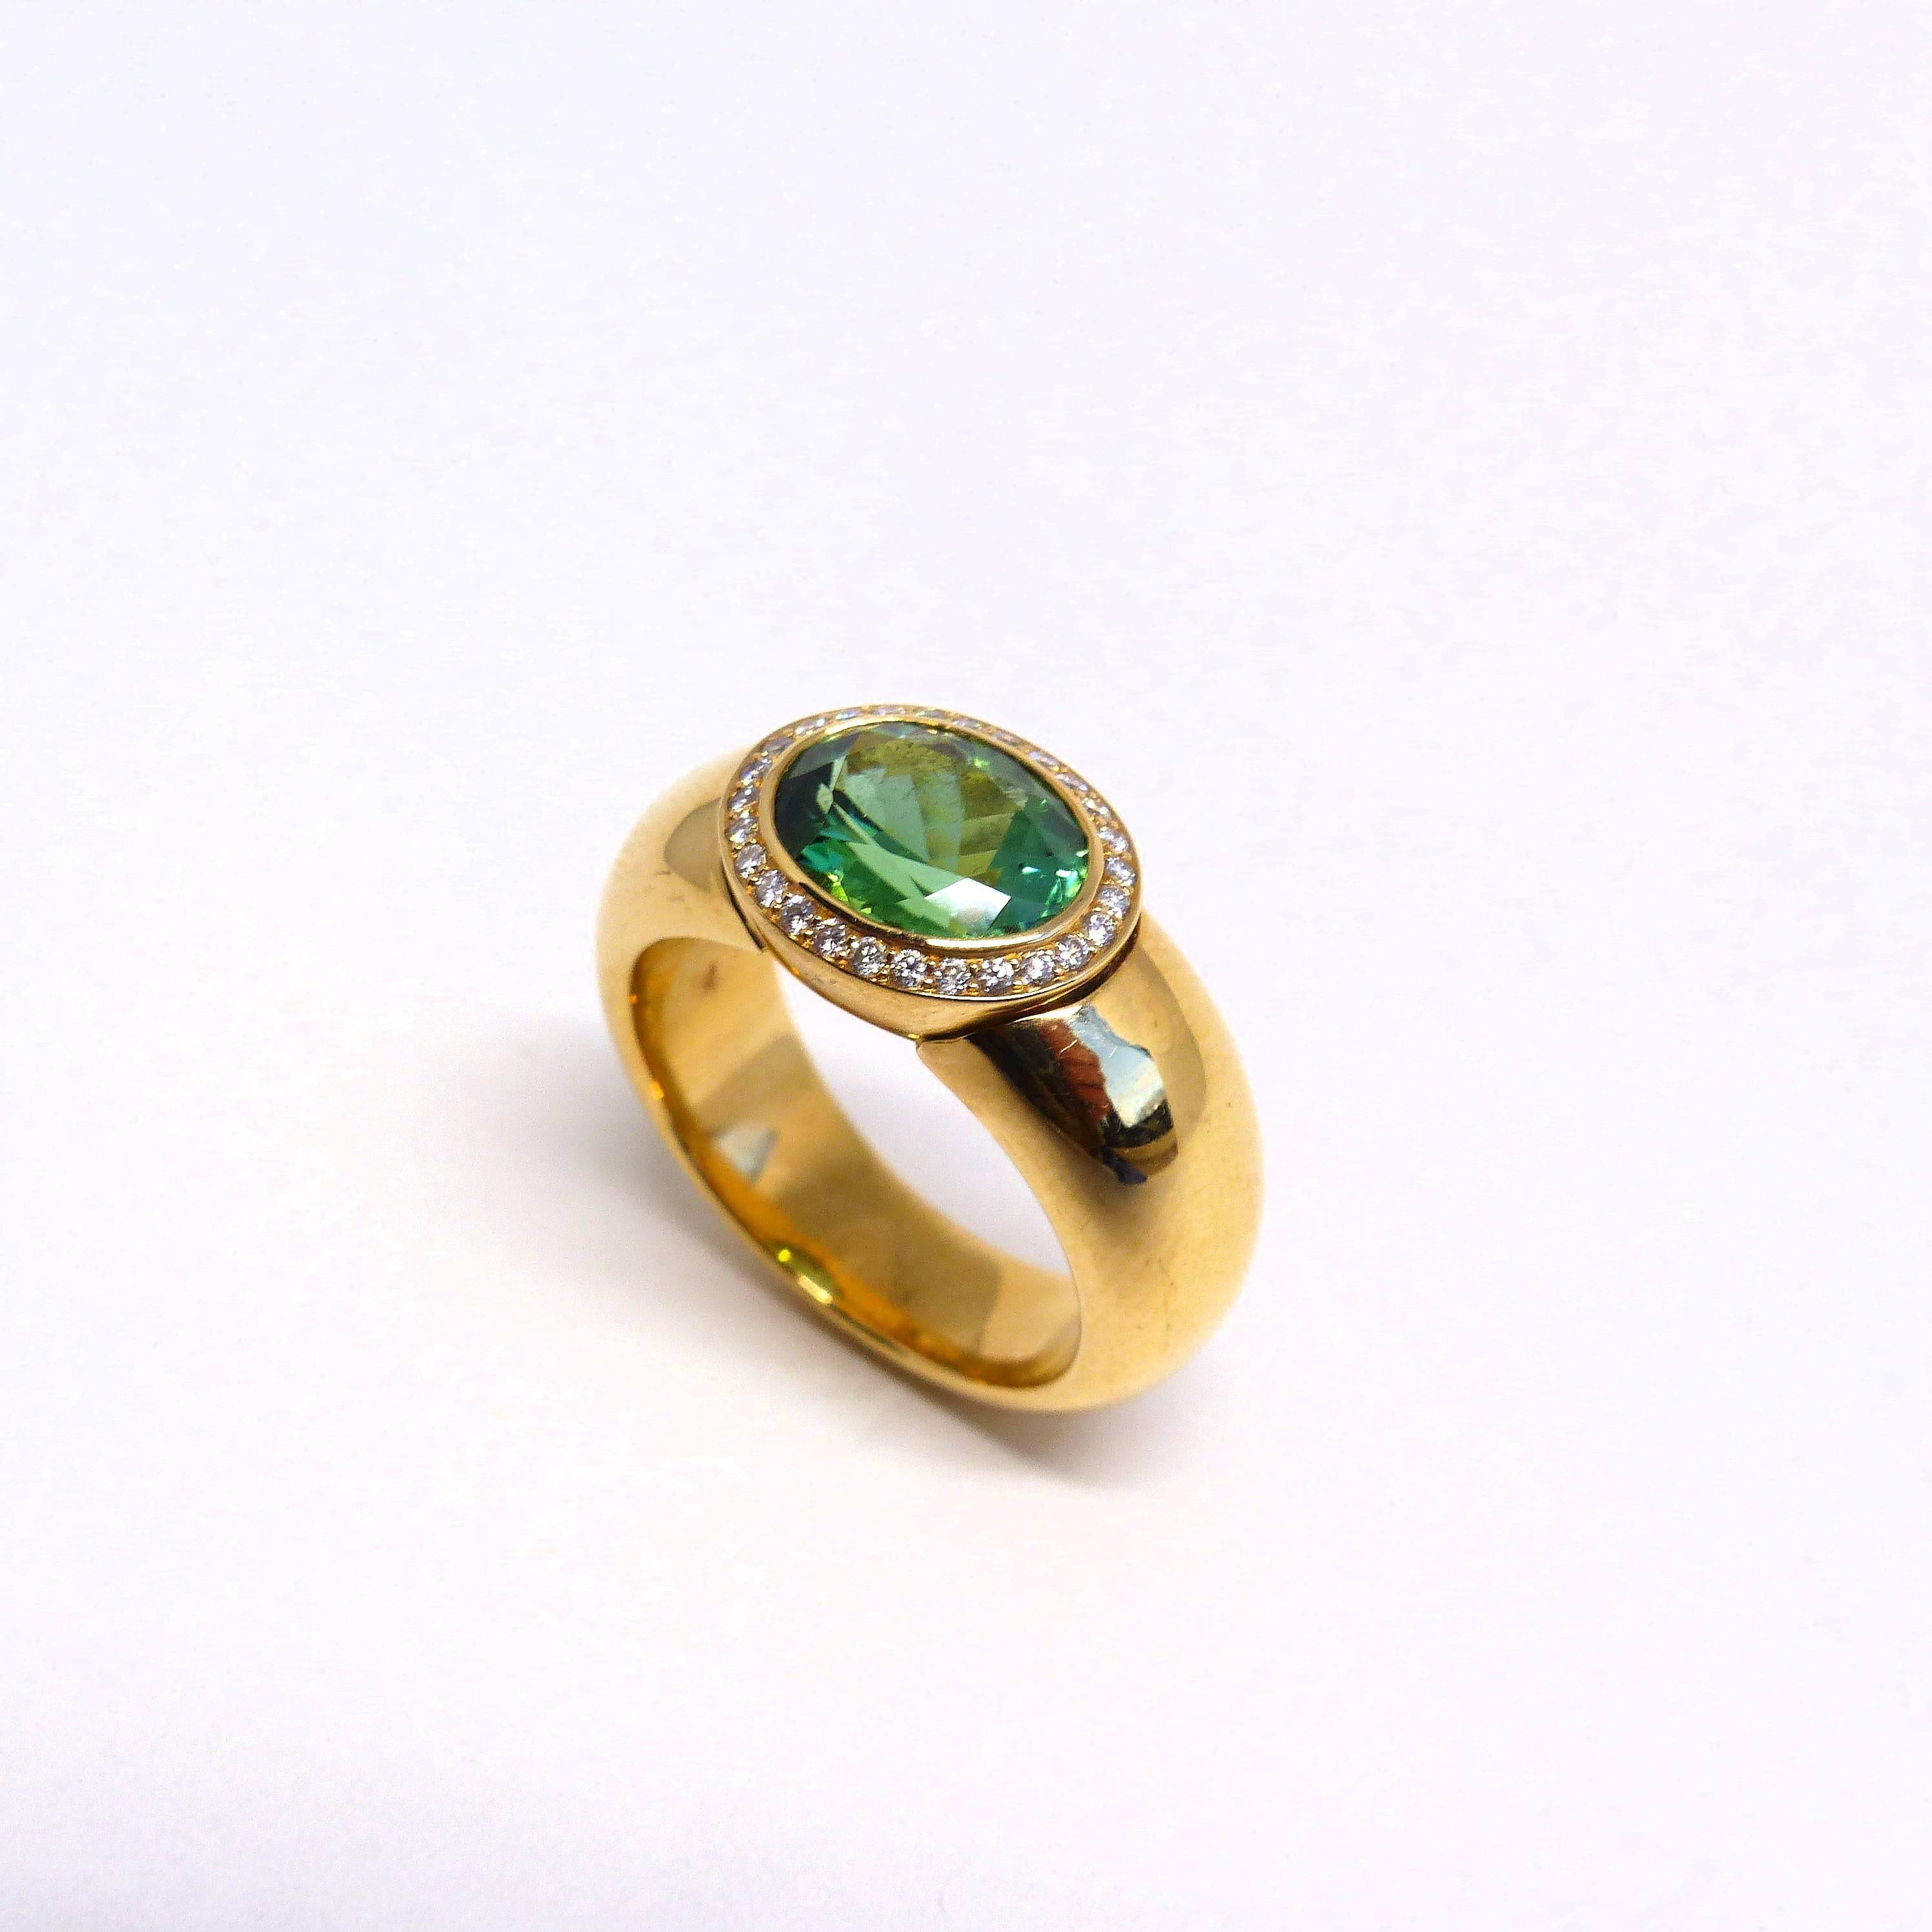 Thomas Leyser is renowned for his contemporary jewellery designs utilizing fine gemstones. 

This 18k rose gold ring (17.84g) with 1x fine Green Tourmaline (facetted, oval, 10x8mm, 2.68ct) + 26x Diamonds (brillant-cut, 1mm, G/VS, 0.15ct).